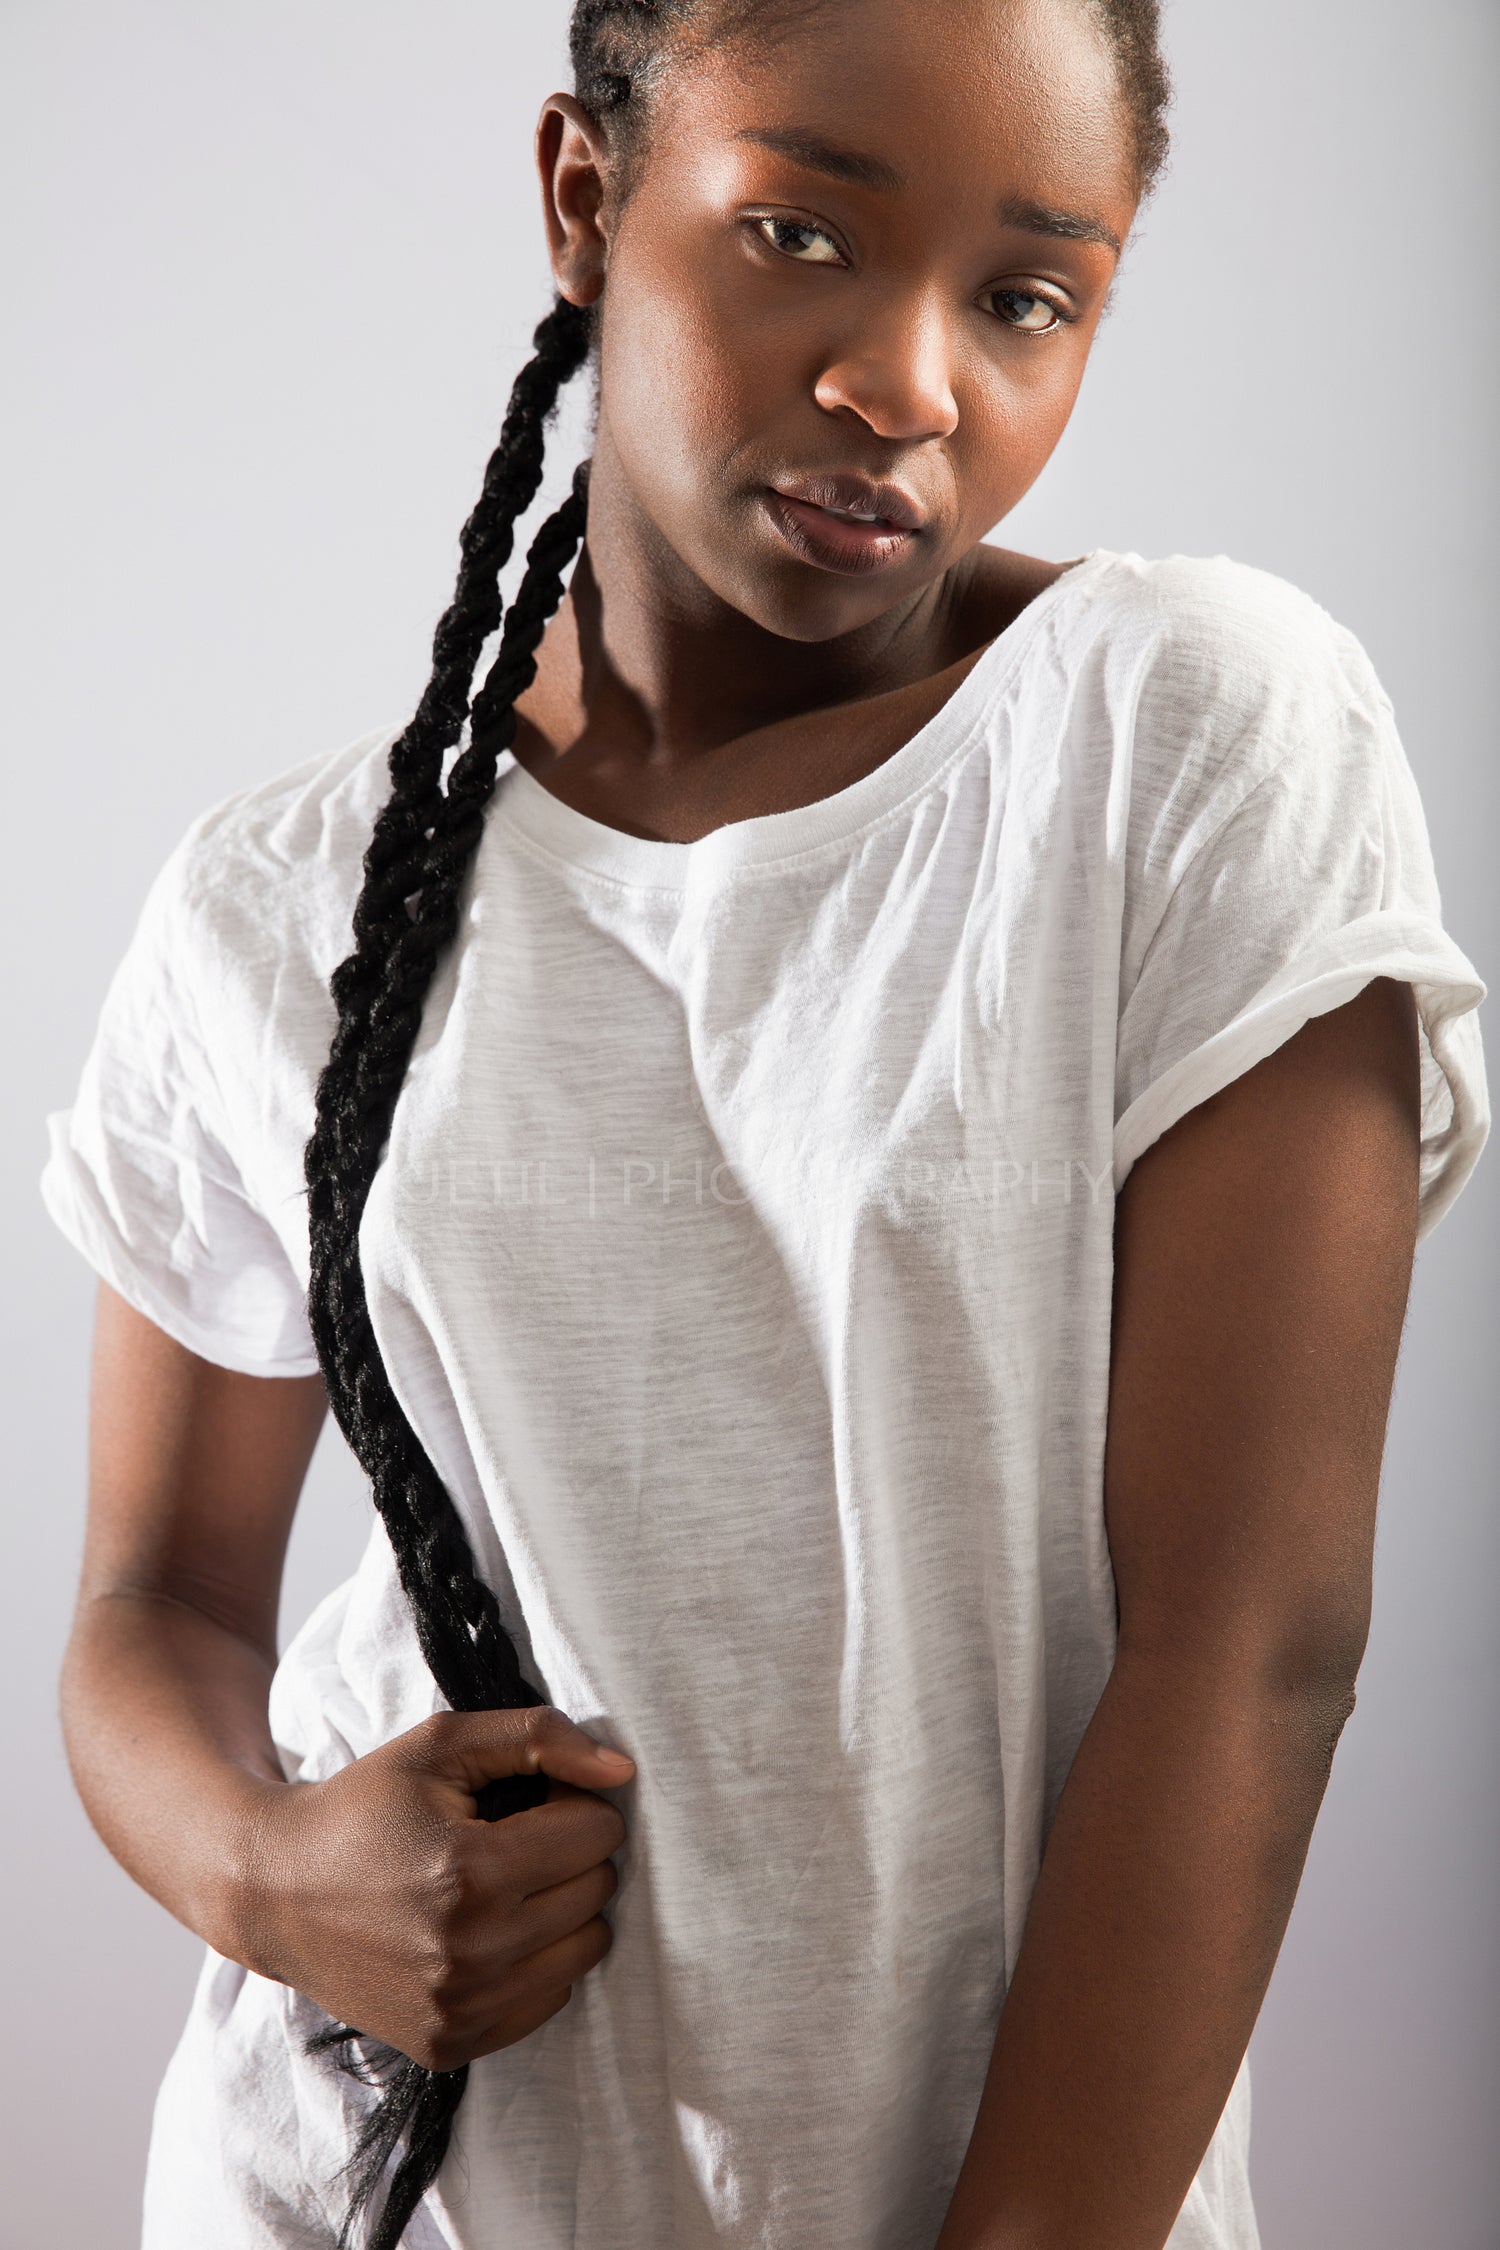 Confident Woman With Braided Hair Over Gray Background